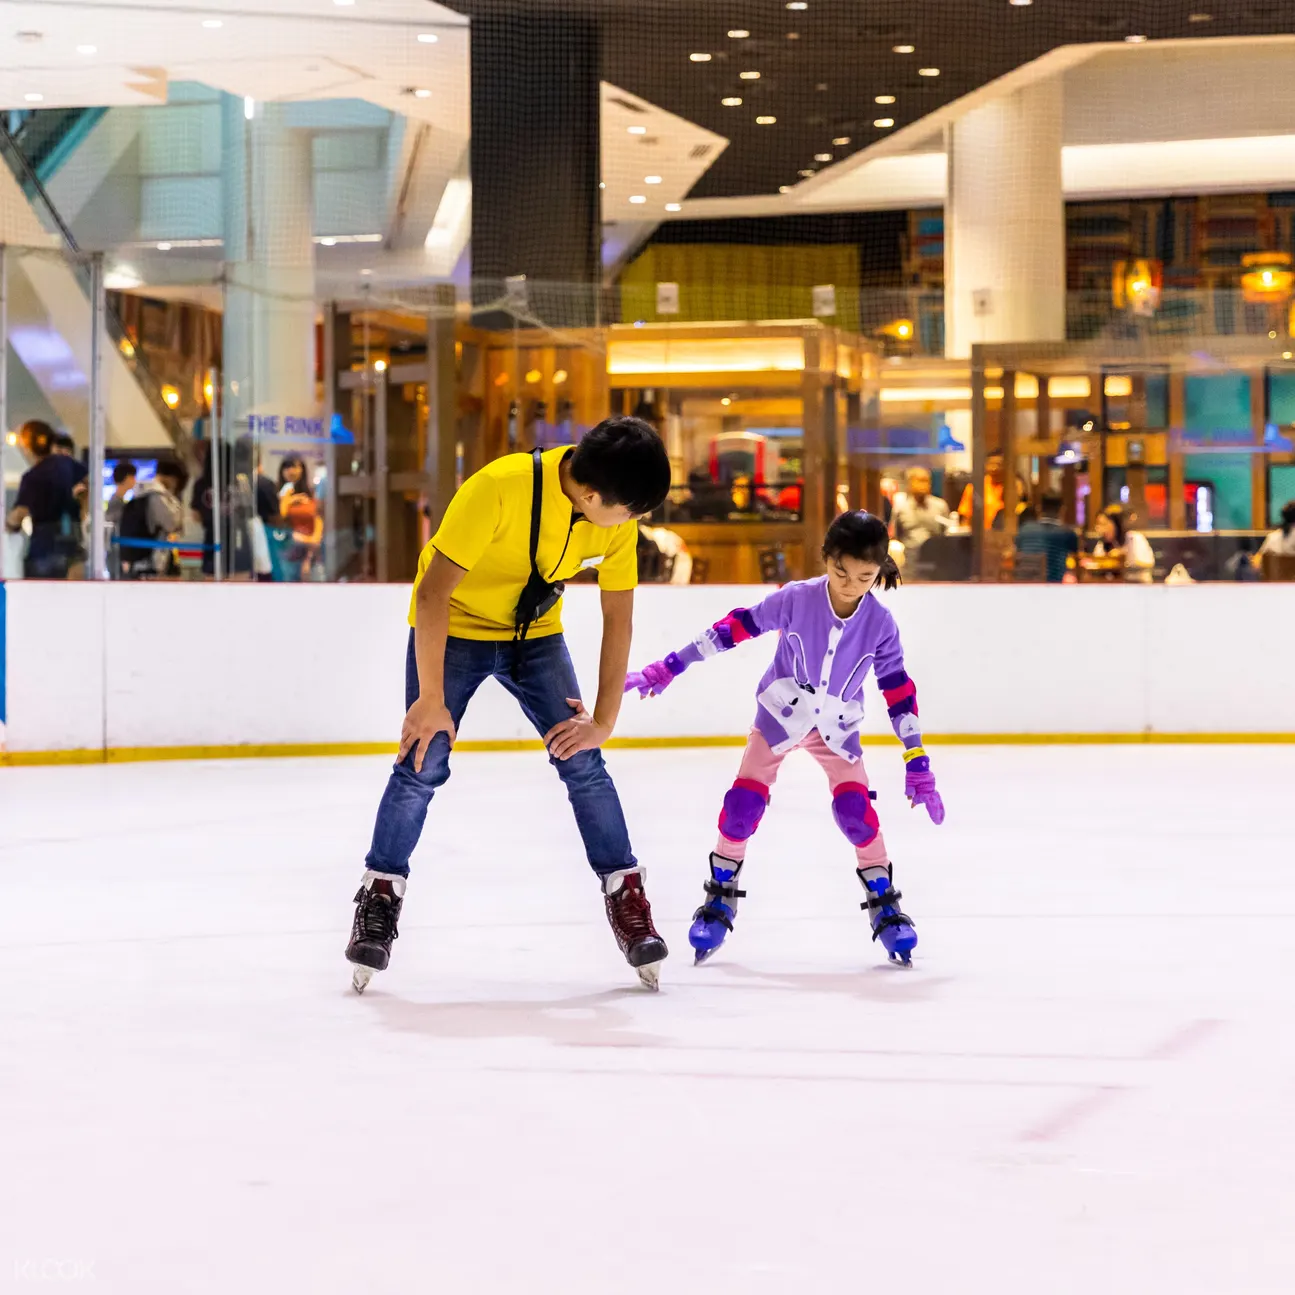 The Rink Ice Skating Experience in JCube Singapore - Klook Singapore